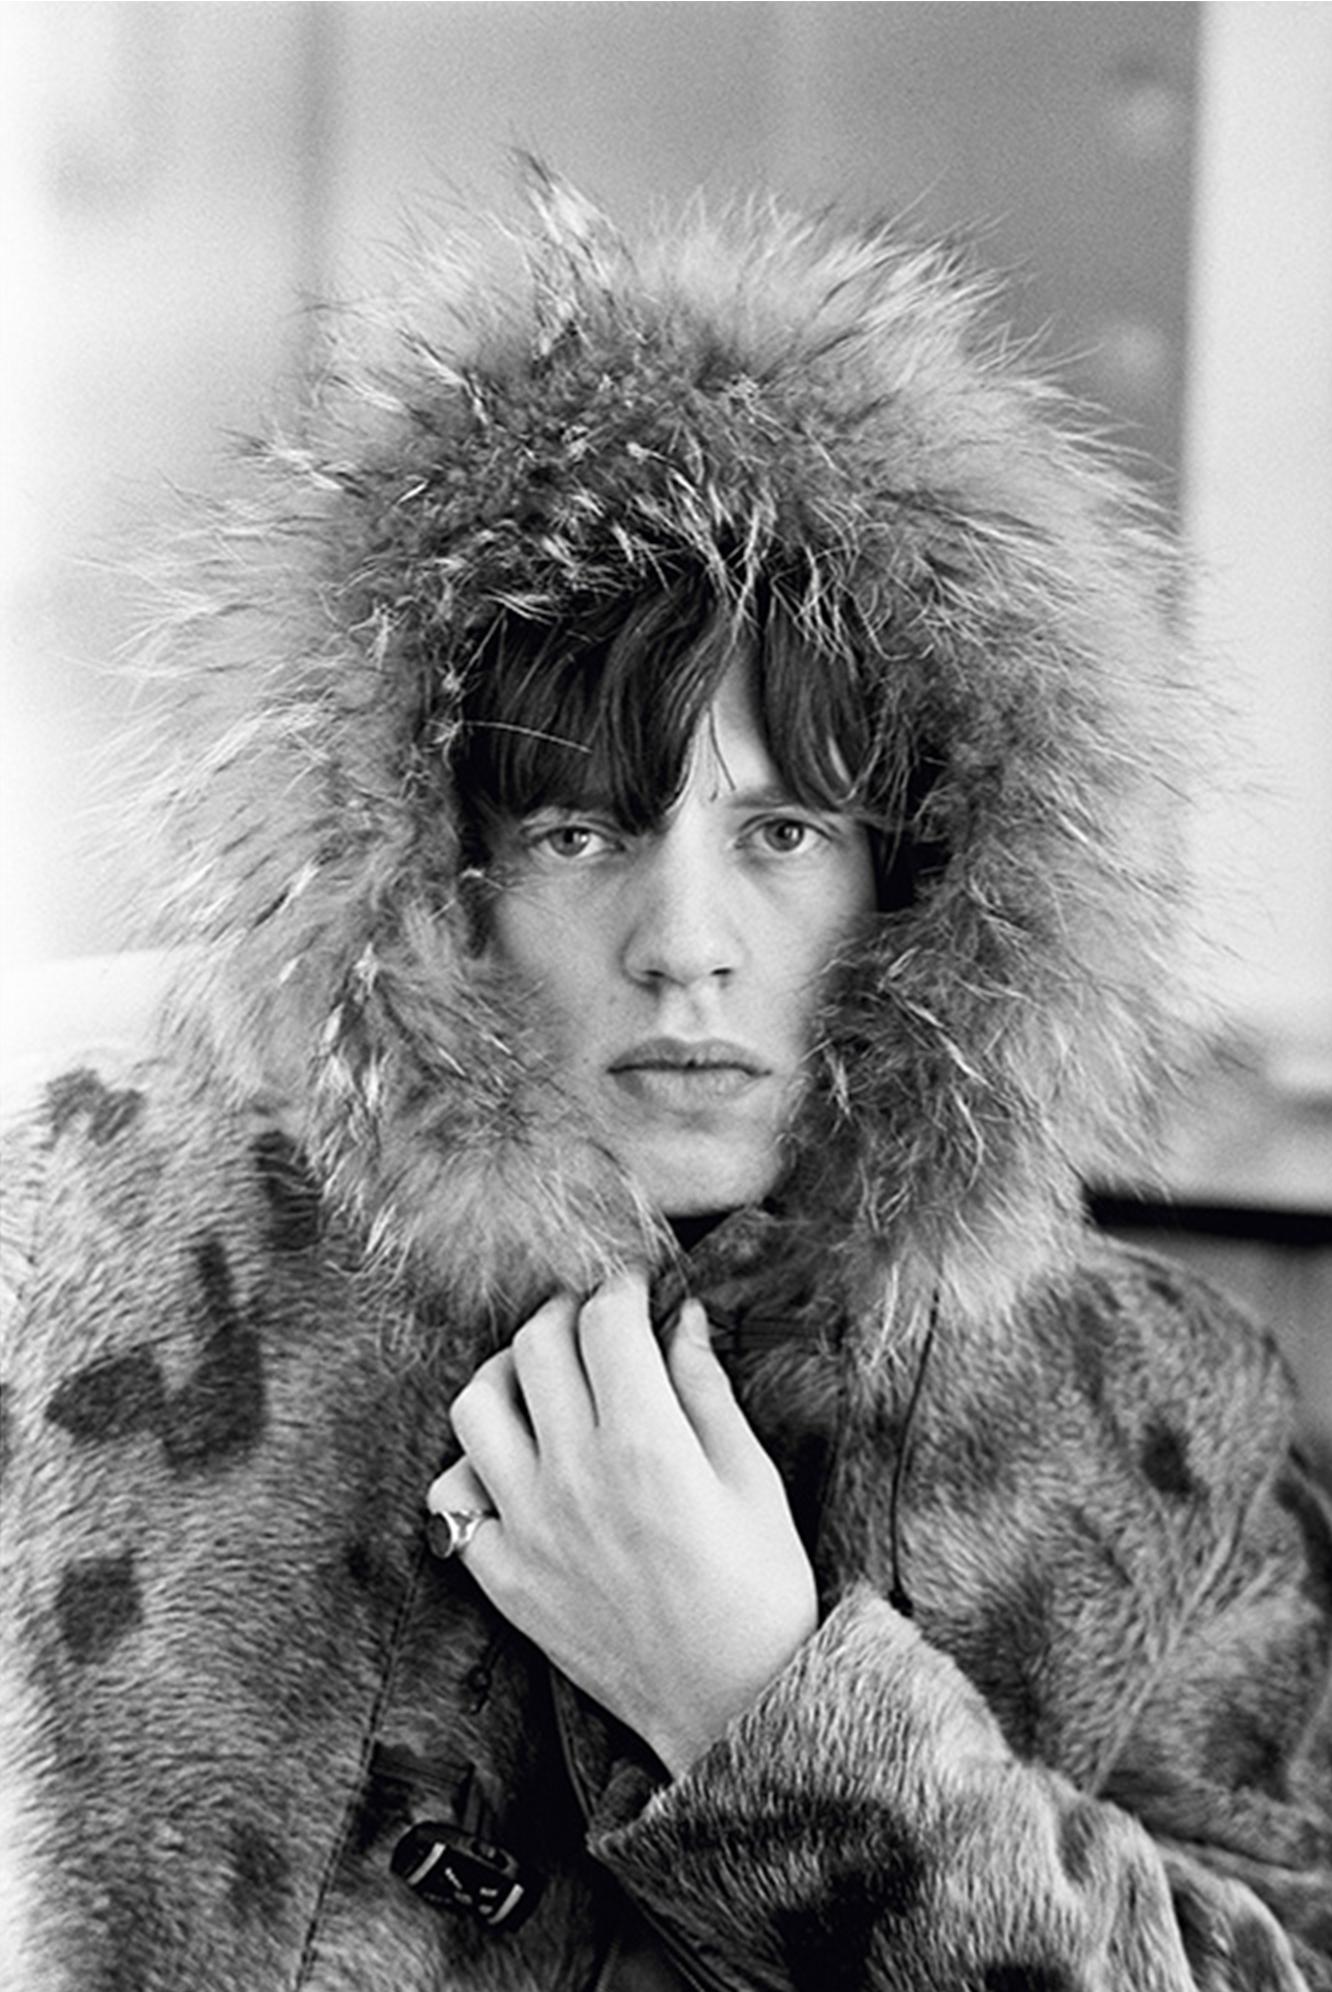 Signed limited edition photographic print of The Rolling Stones singer Mick Jagger posing in a fur parka, with a fur trimmed hood, 1964, by Terry O'Neill

Signed limited edition "Lifetime" print - 16x20" 

Silver gelatin print. One of the last few